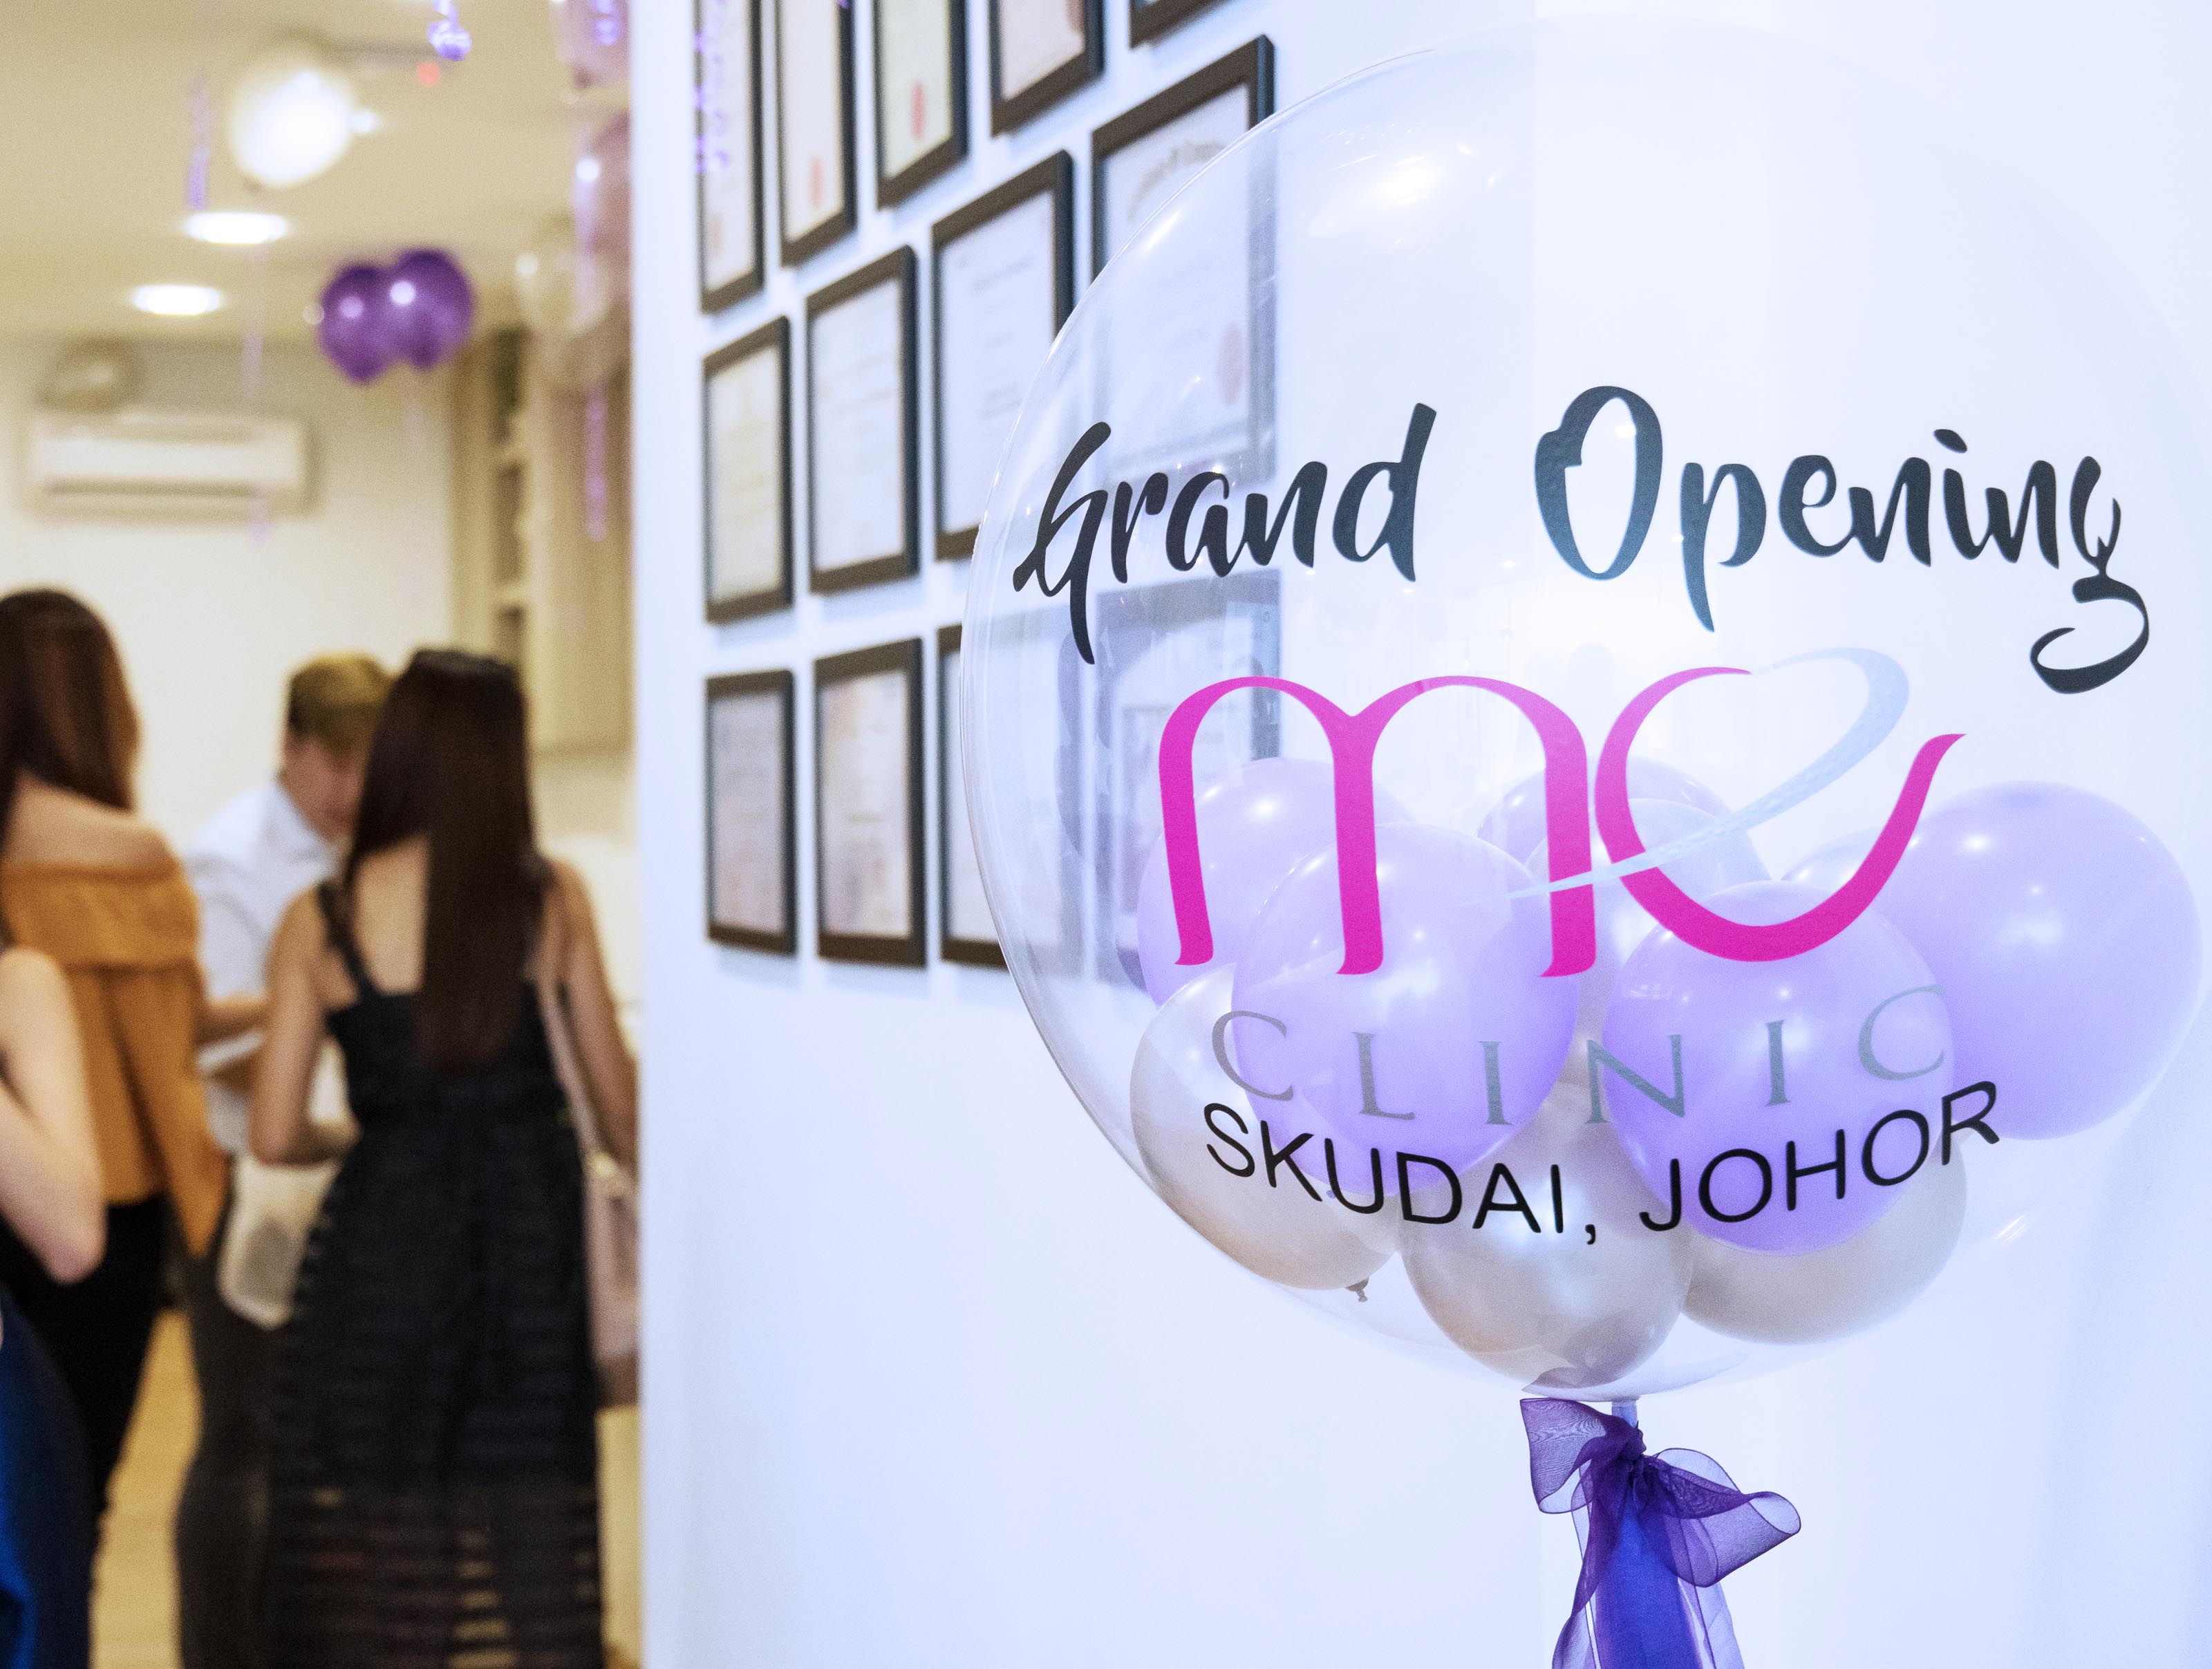 Grand Opening Of Me Aesthetic Clinic Skudai